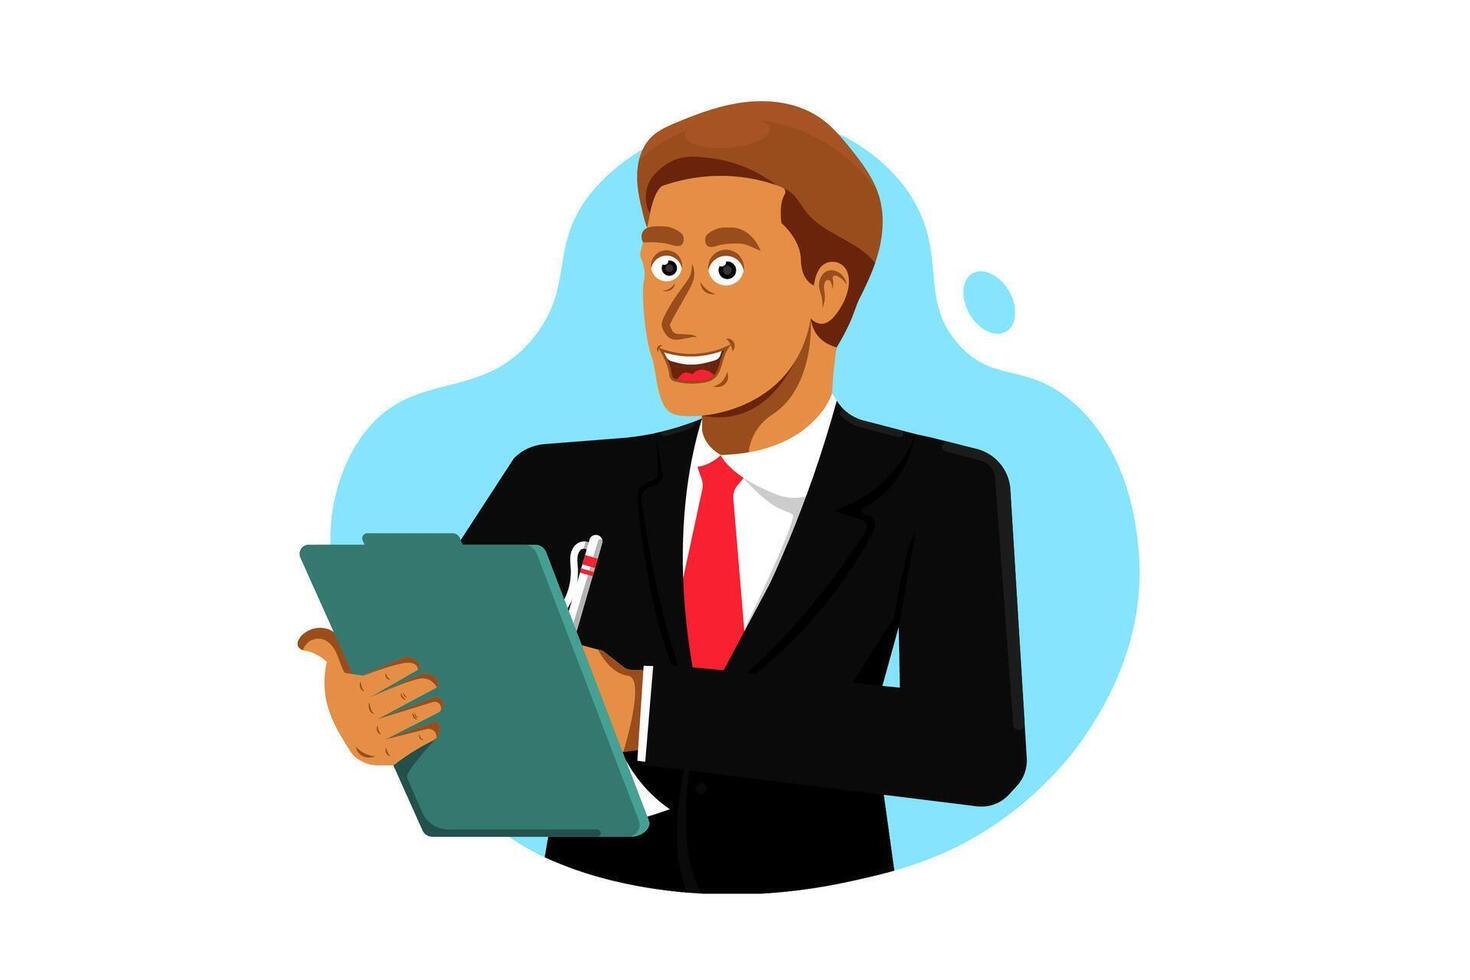 Smiling businessman cartoon holding clipboard on isolated background, Vector illustration.